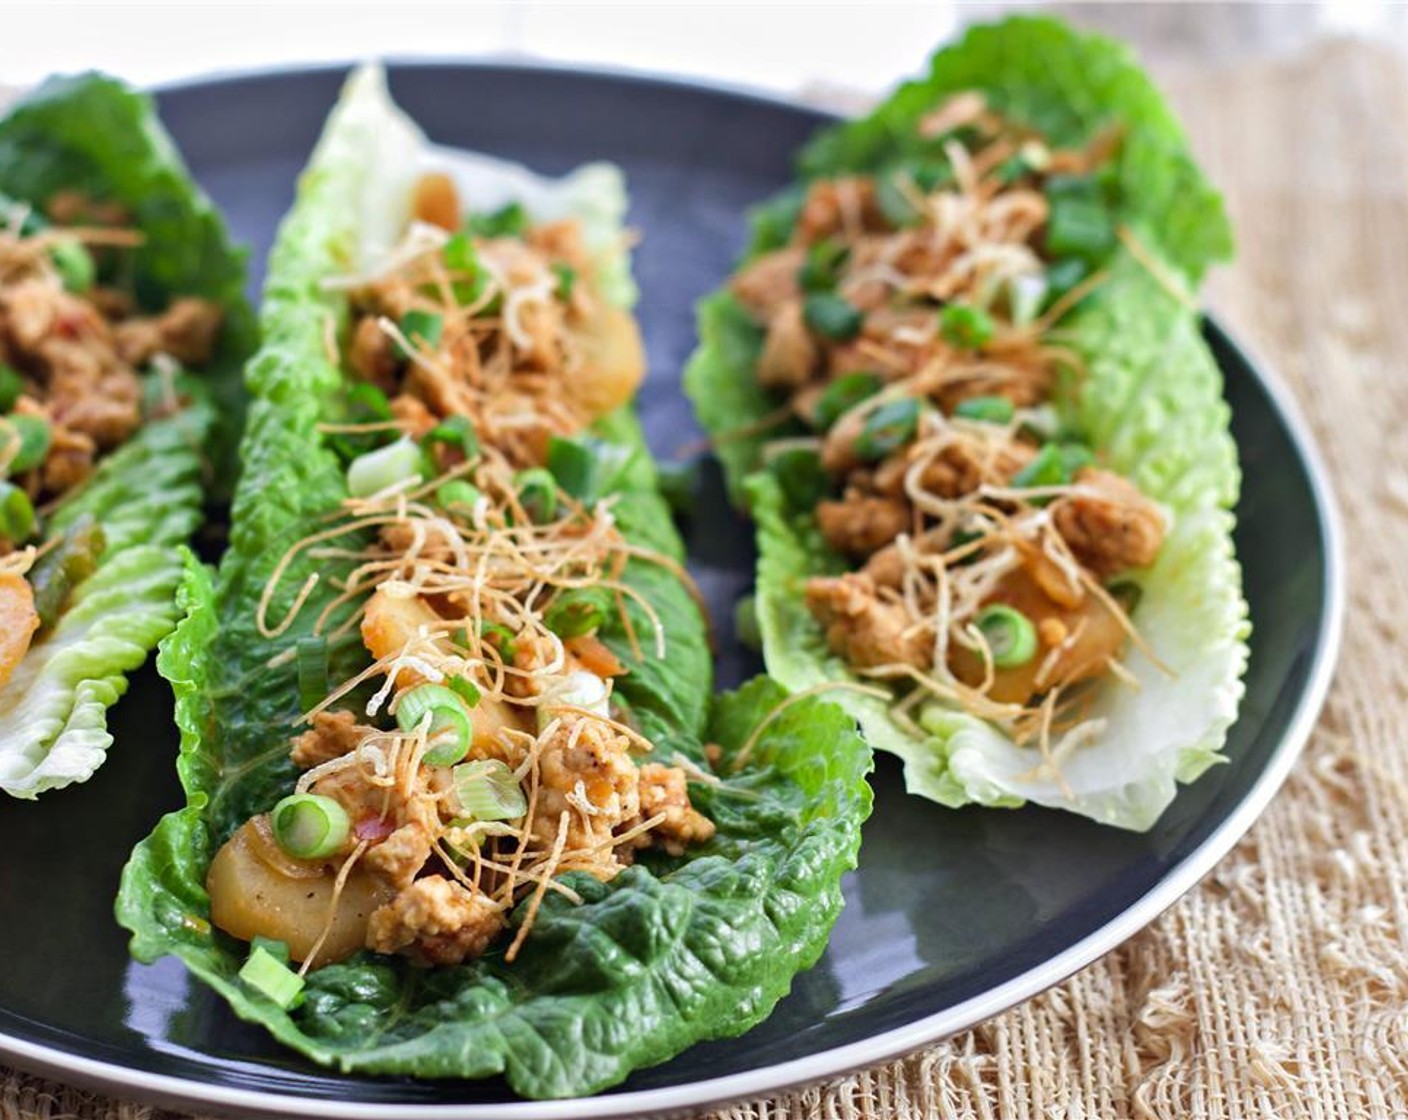 step 7 Separate the leaves from the Romaine Lettuce (2 heads) and wash. Dry using a salad spinner or paper towels. assemble the wraps,  top the pieces of lettuce with the filling, Scallion (1 bunch) and maifun noodles.